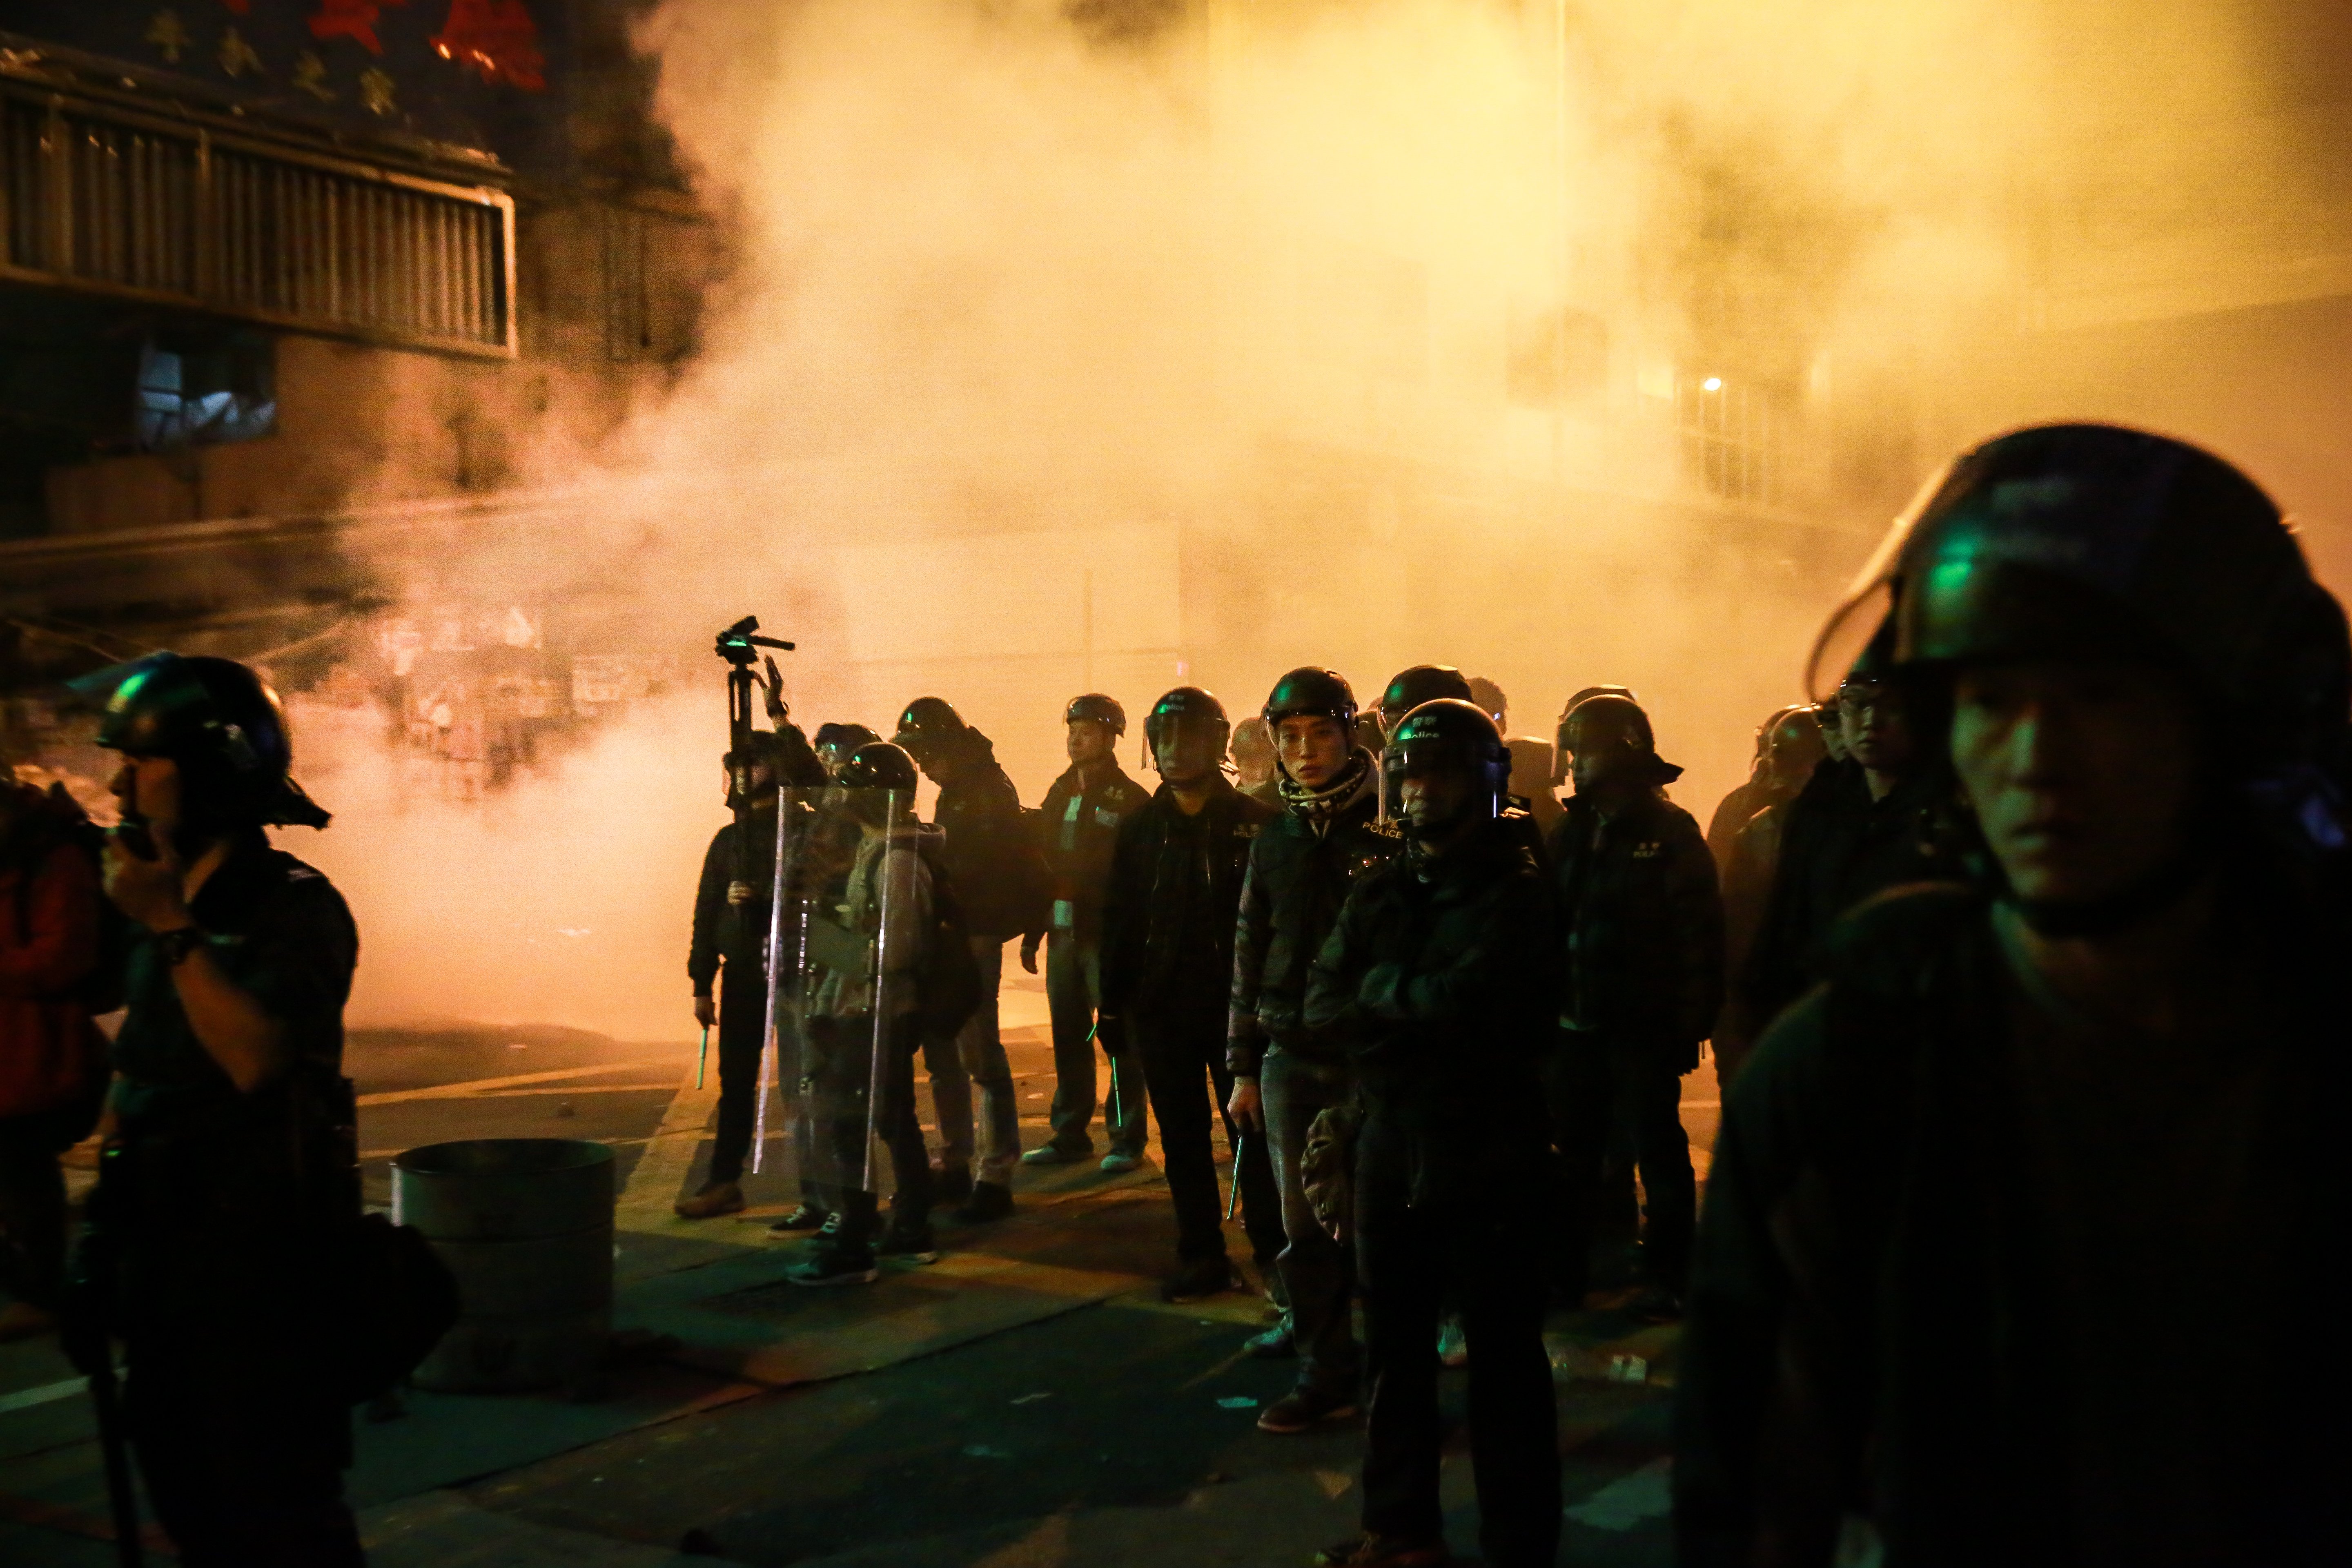 Questions are being asked about what has happened in Hong Kong after the Mong Kok riot. Photo: Bloomberg